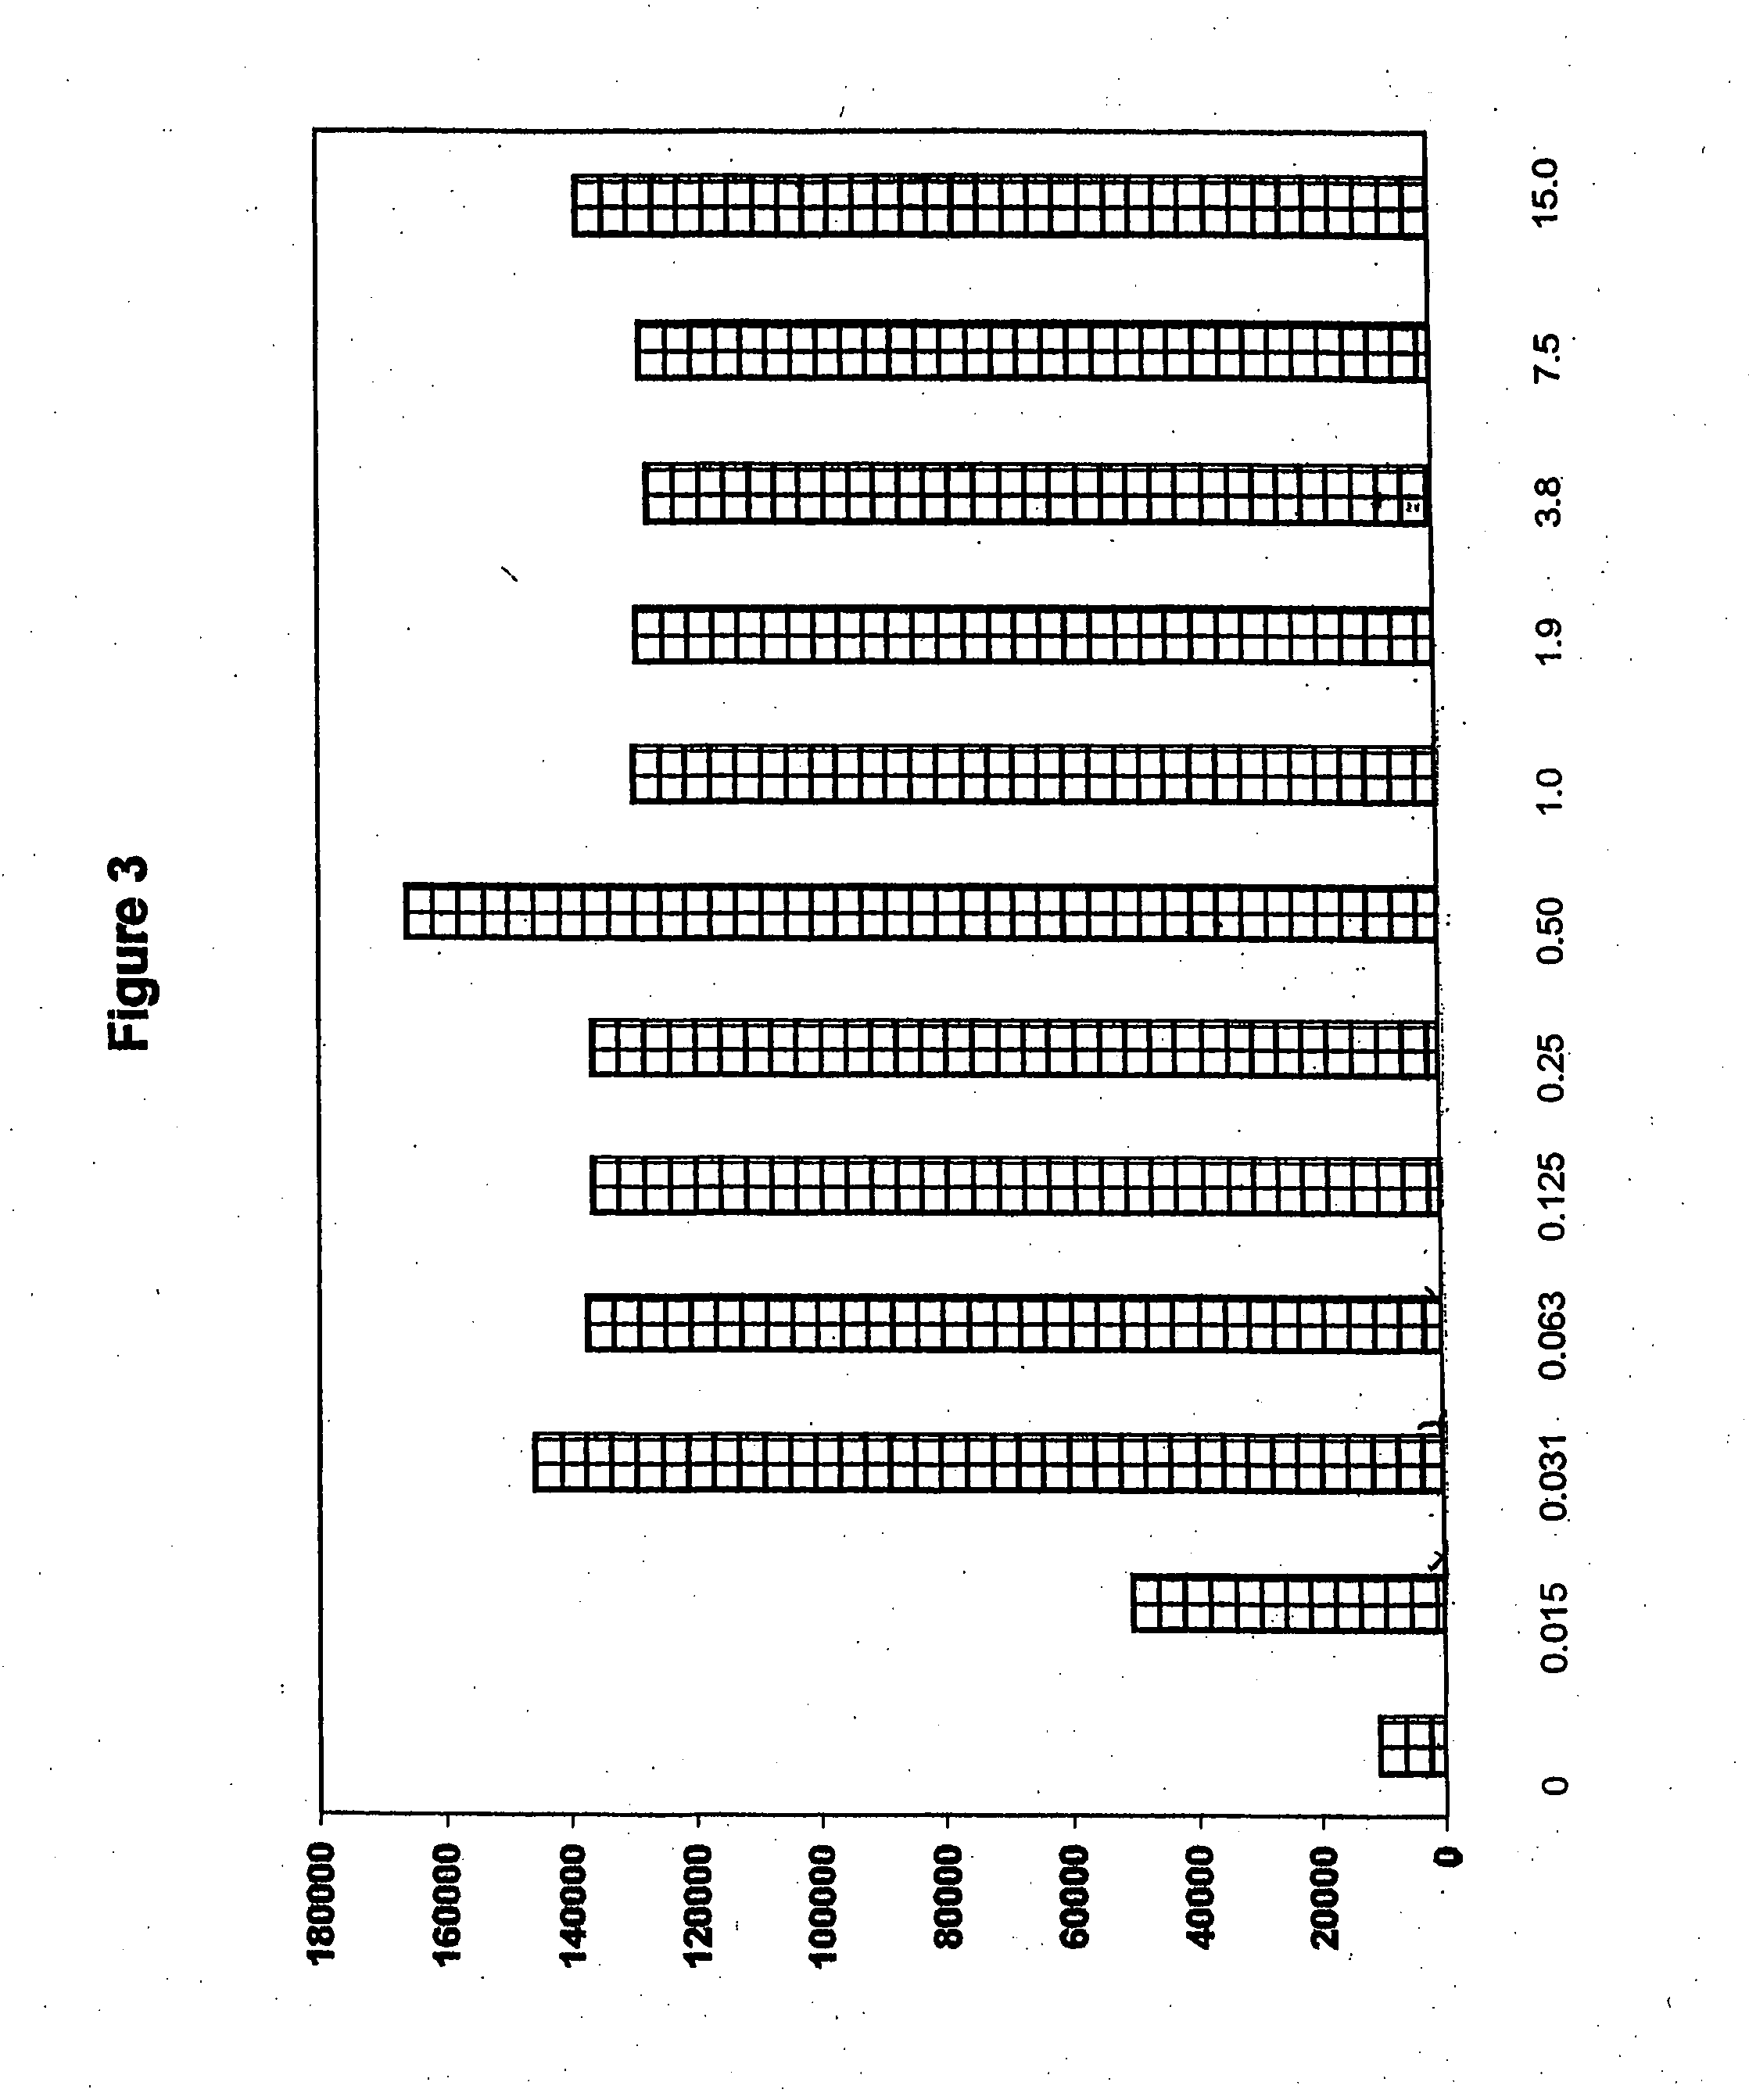 Transmucosal Administration of Aggregated Antigens